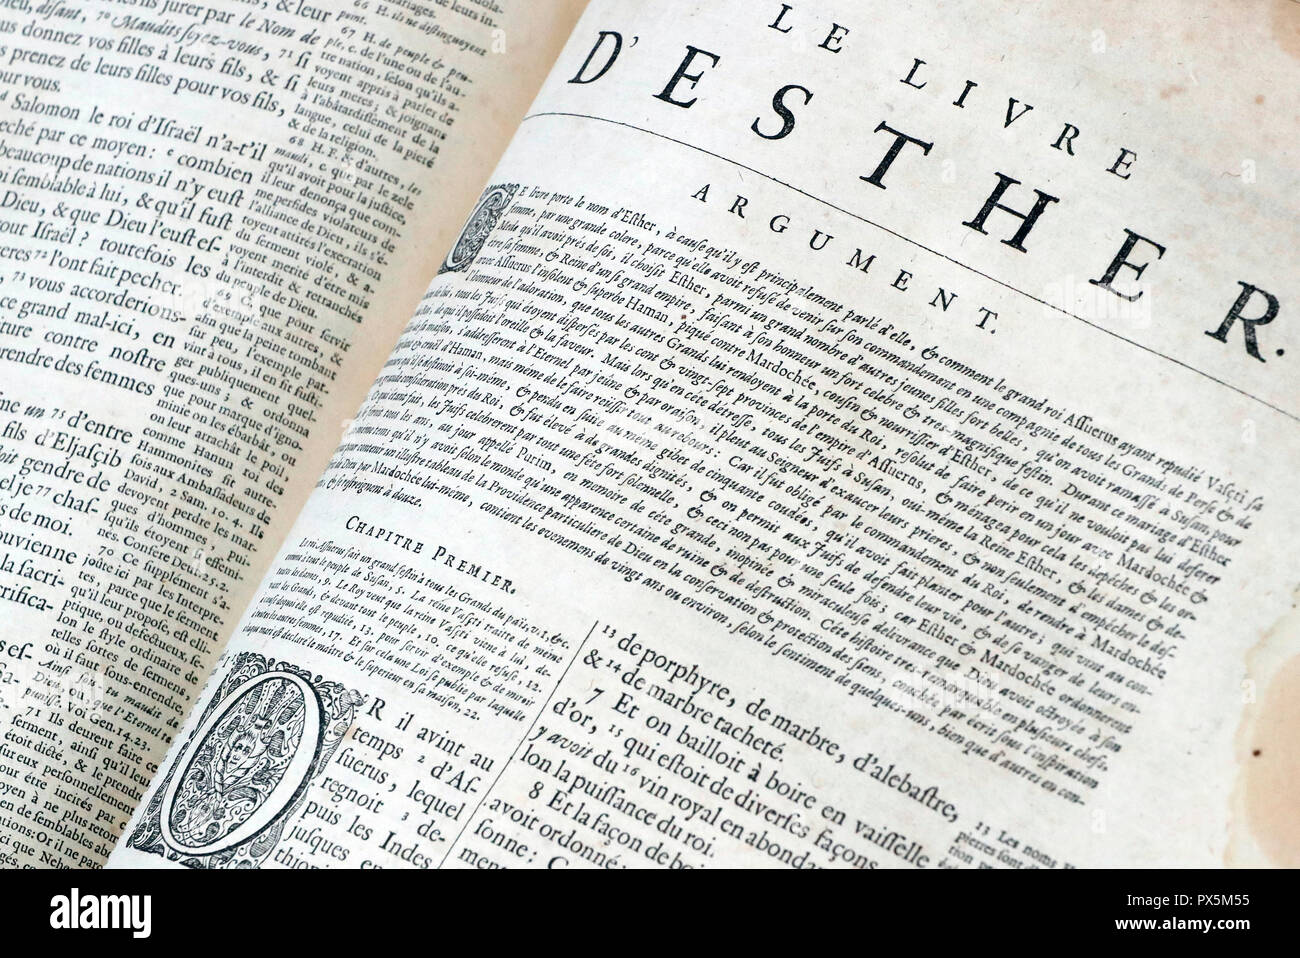 Old bible in French, 1669.  Old Testament. The book of Esther. Stock Photo